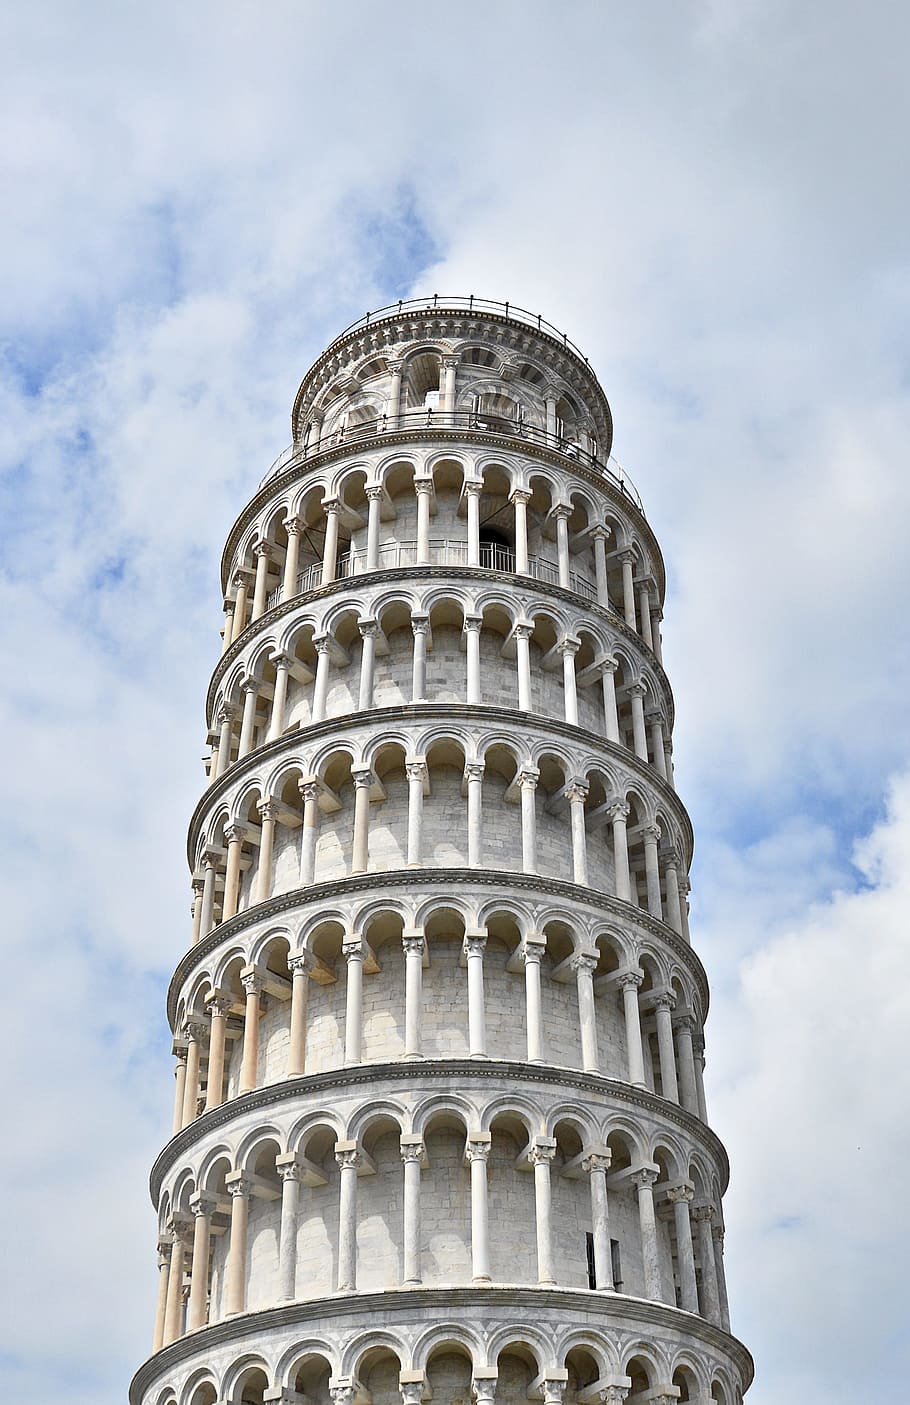 Leaning Tower, Pisa, Tuscany, Italy, architecture, places of interest, leaning Tower of Pisa, campo Dei Miracoli, tower, famous Place